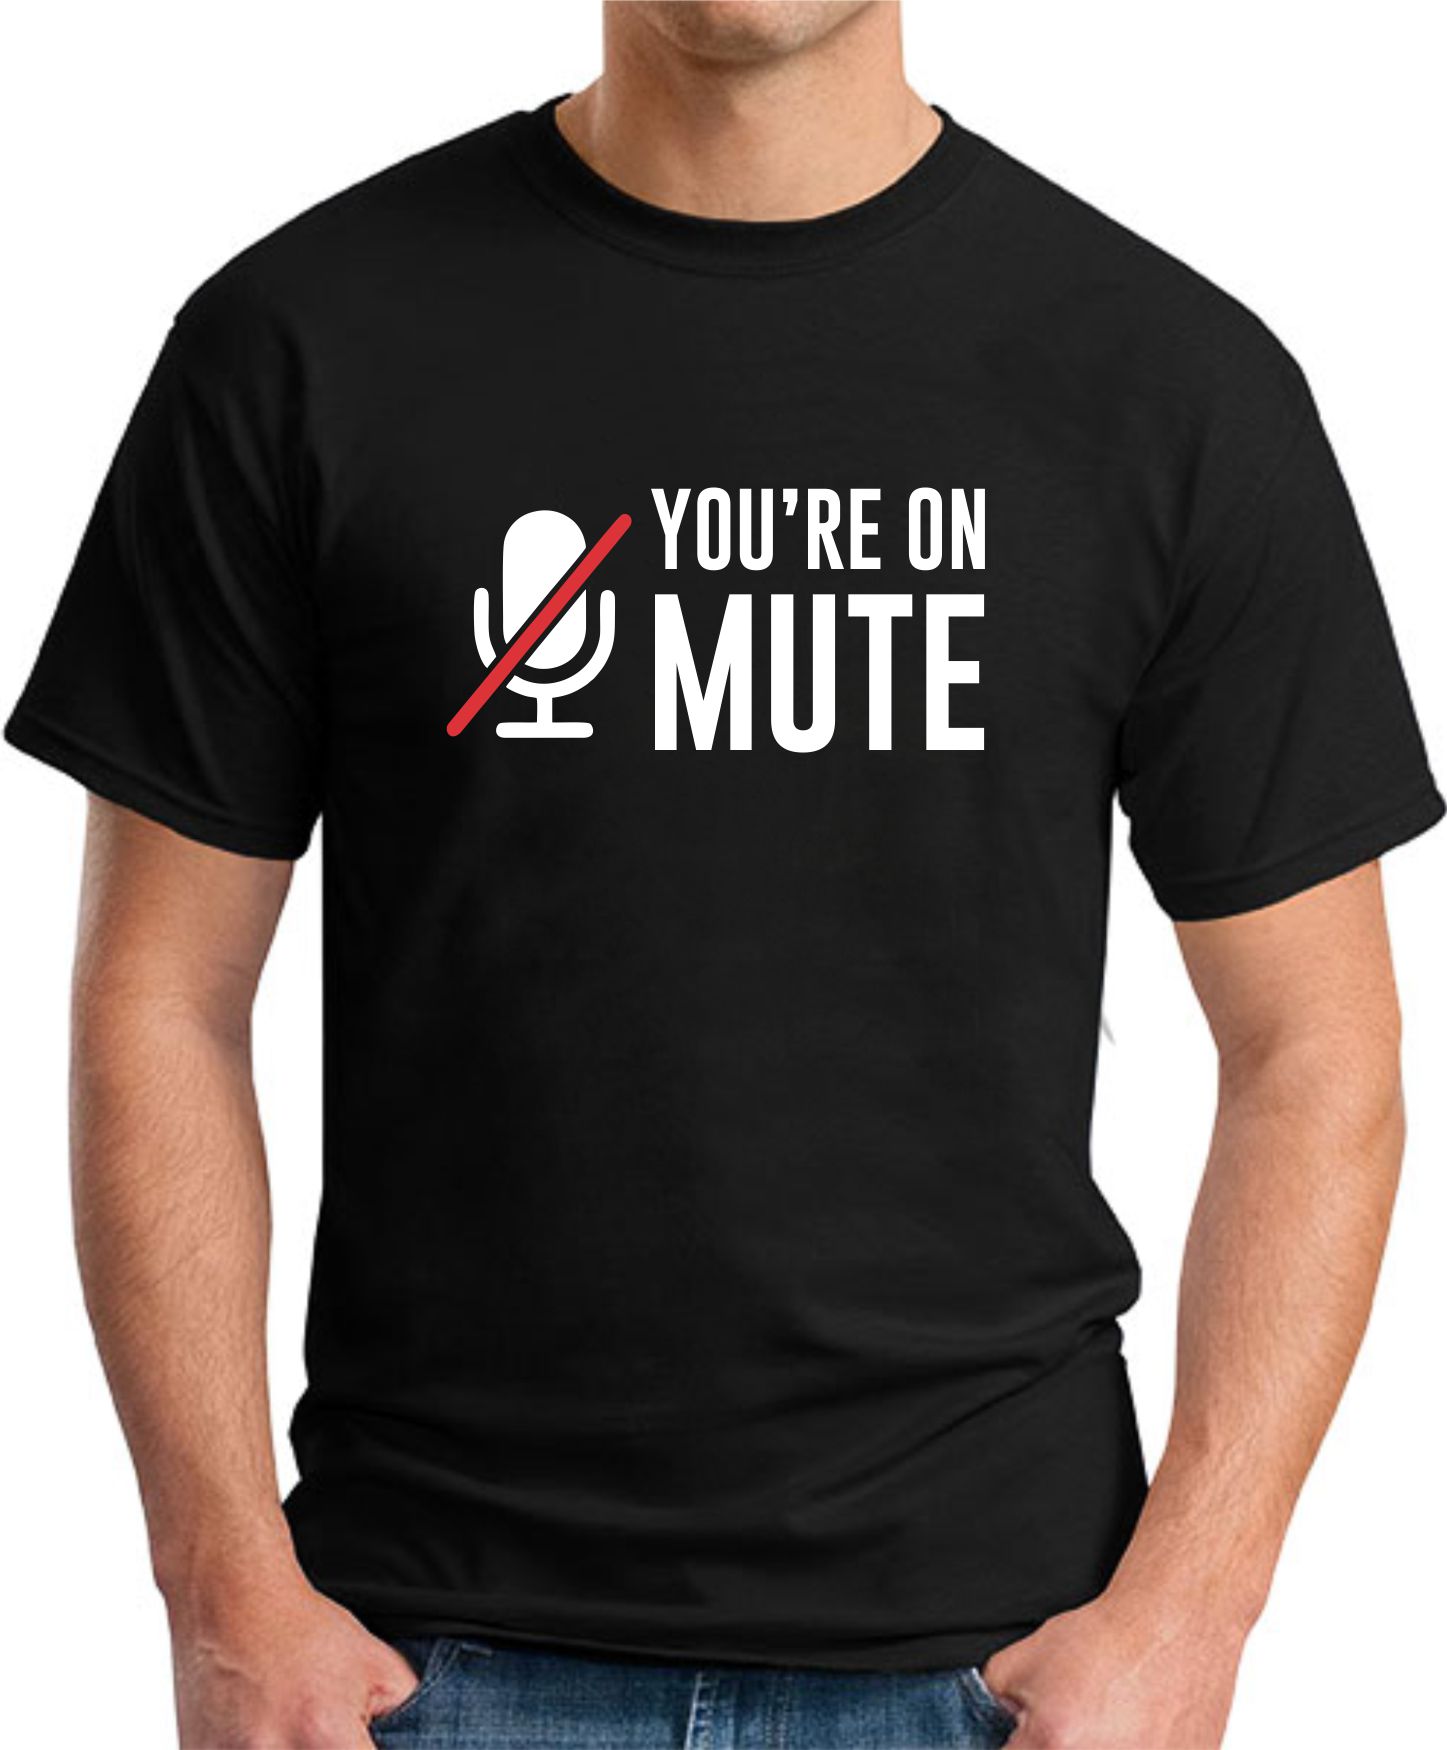 YOU'RE ON MUTE black